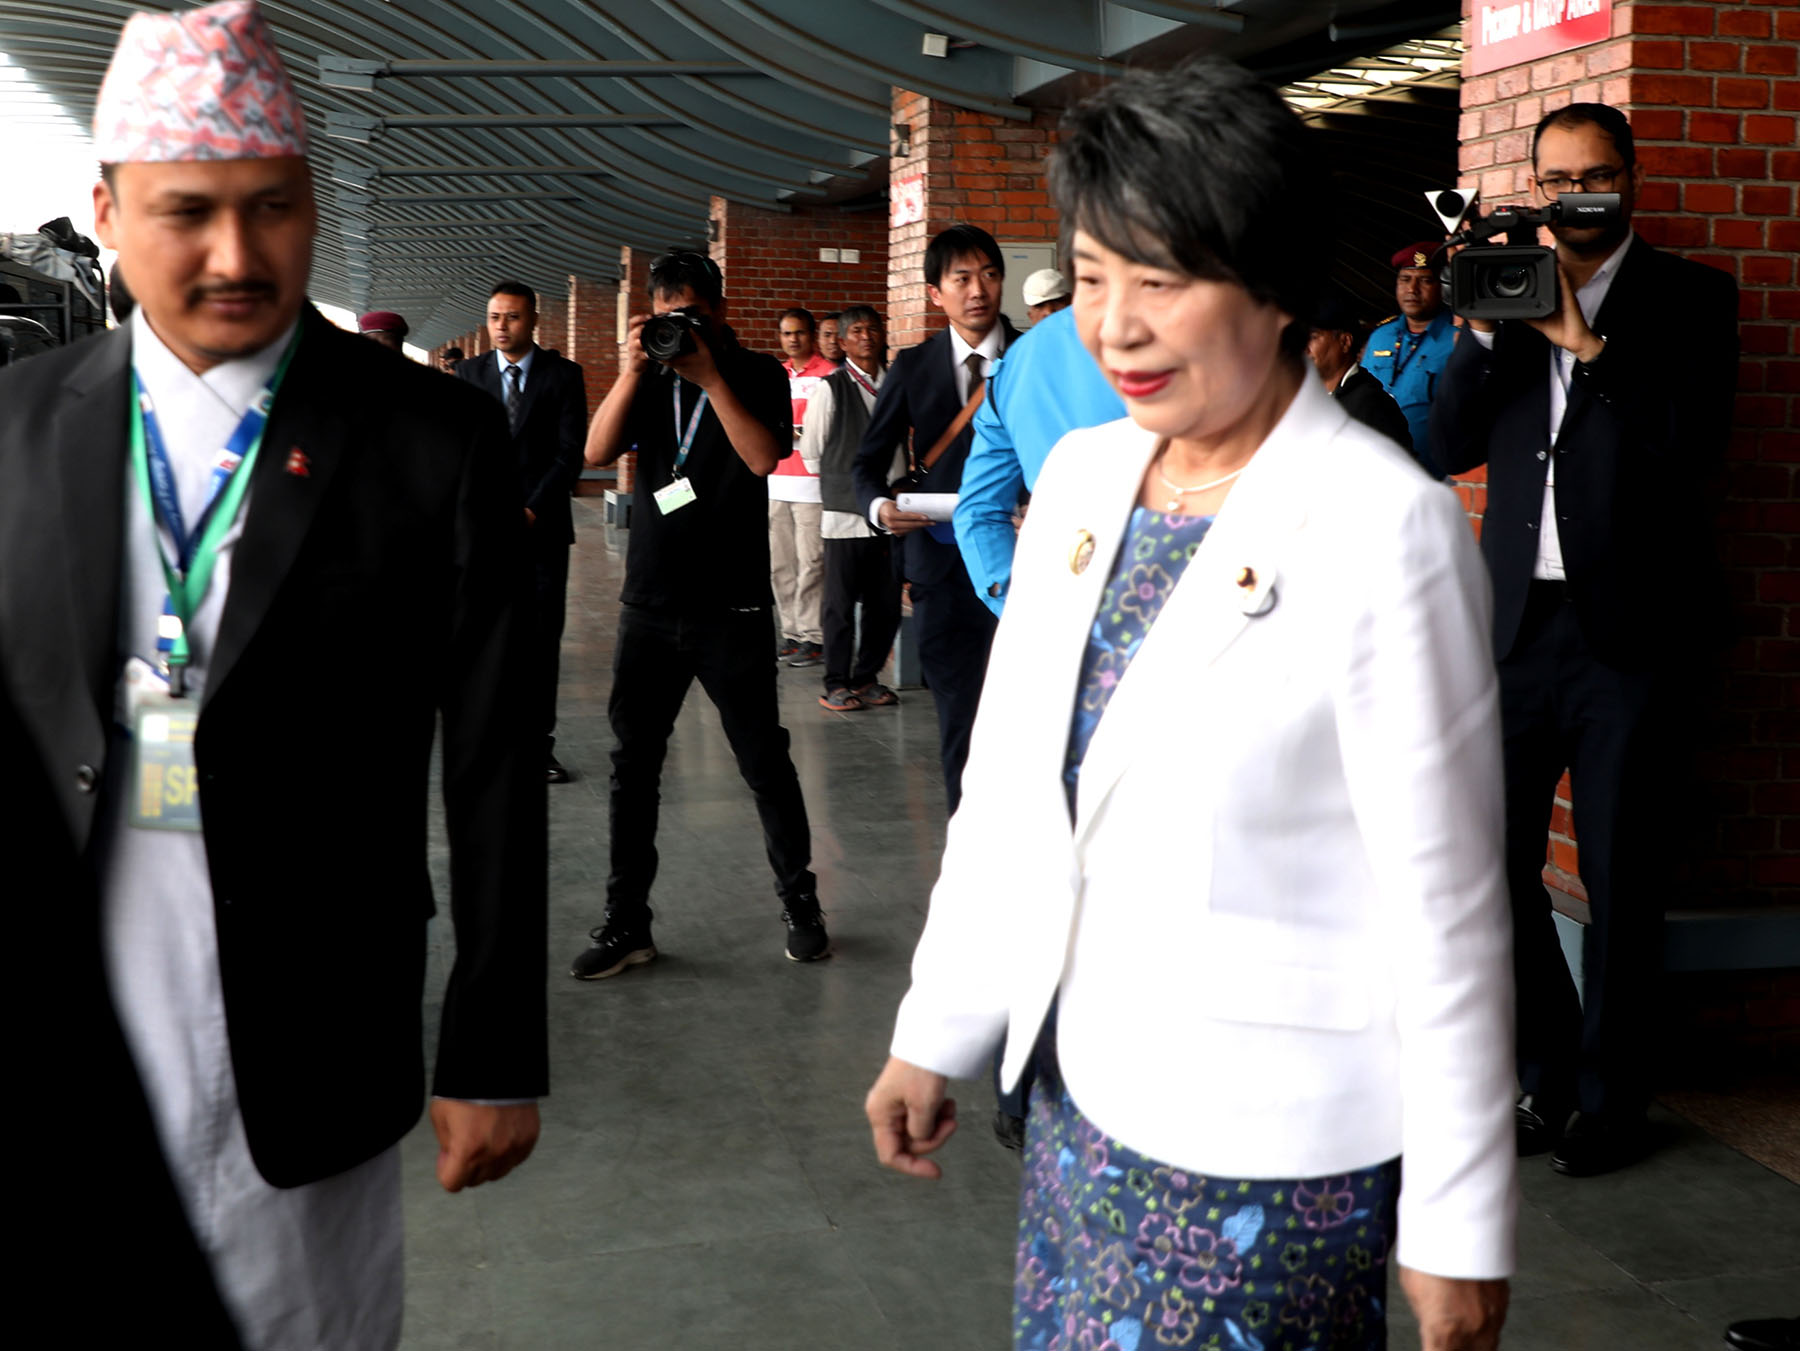 Japan & Nepal share many things in common: Japan’s Foreign Minister Kamikawa Yoko